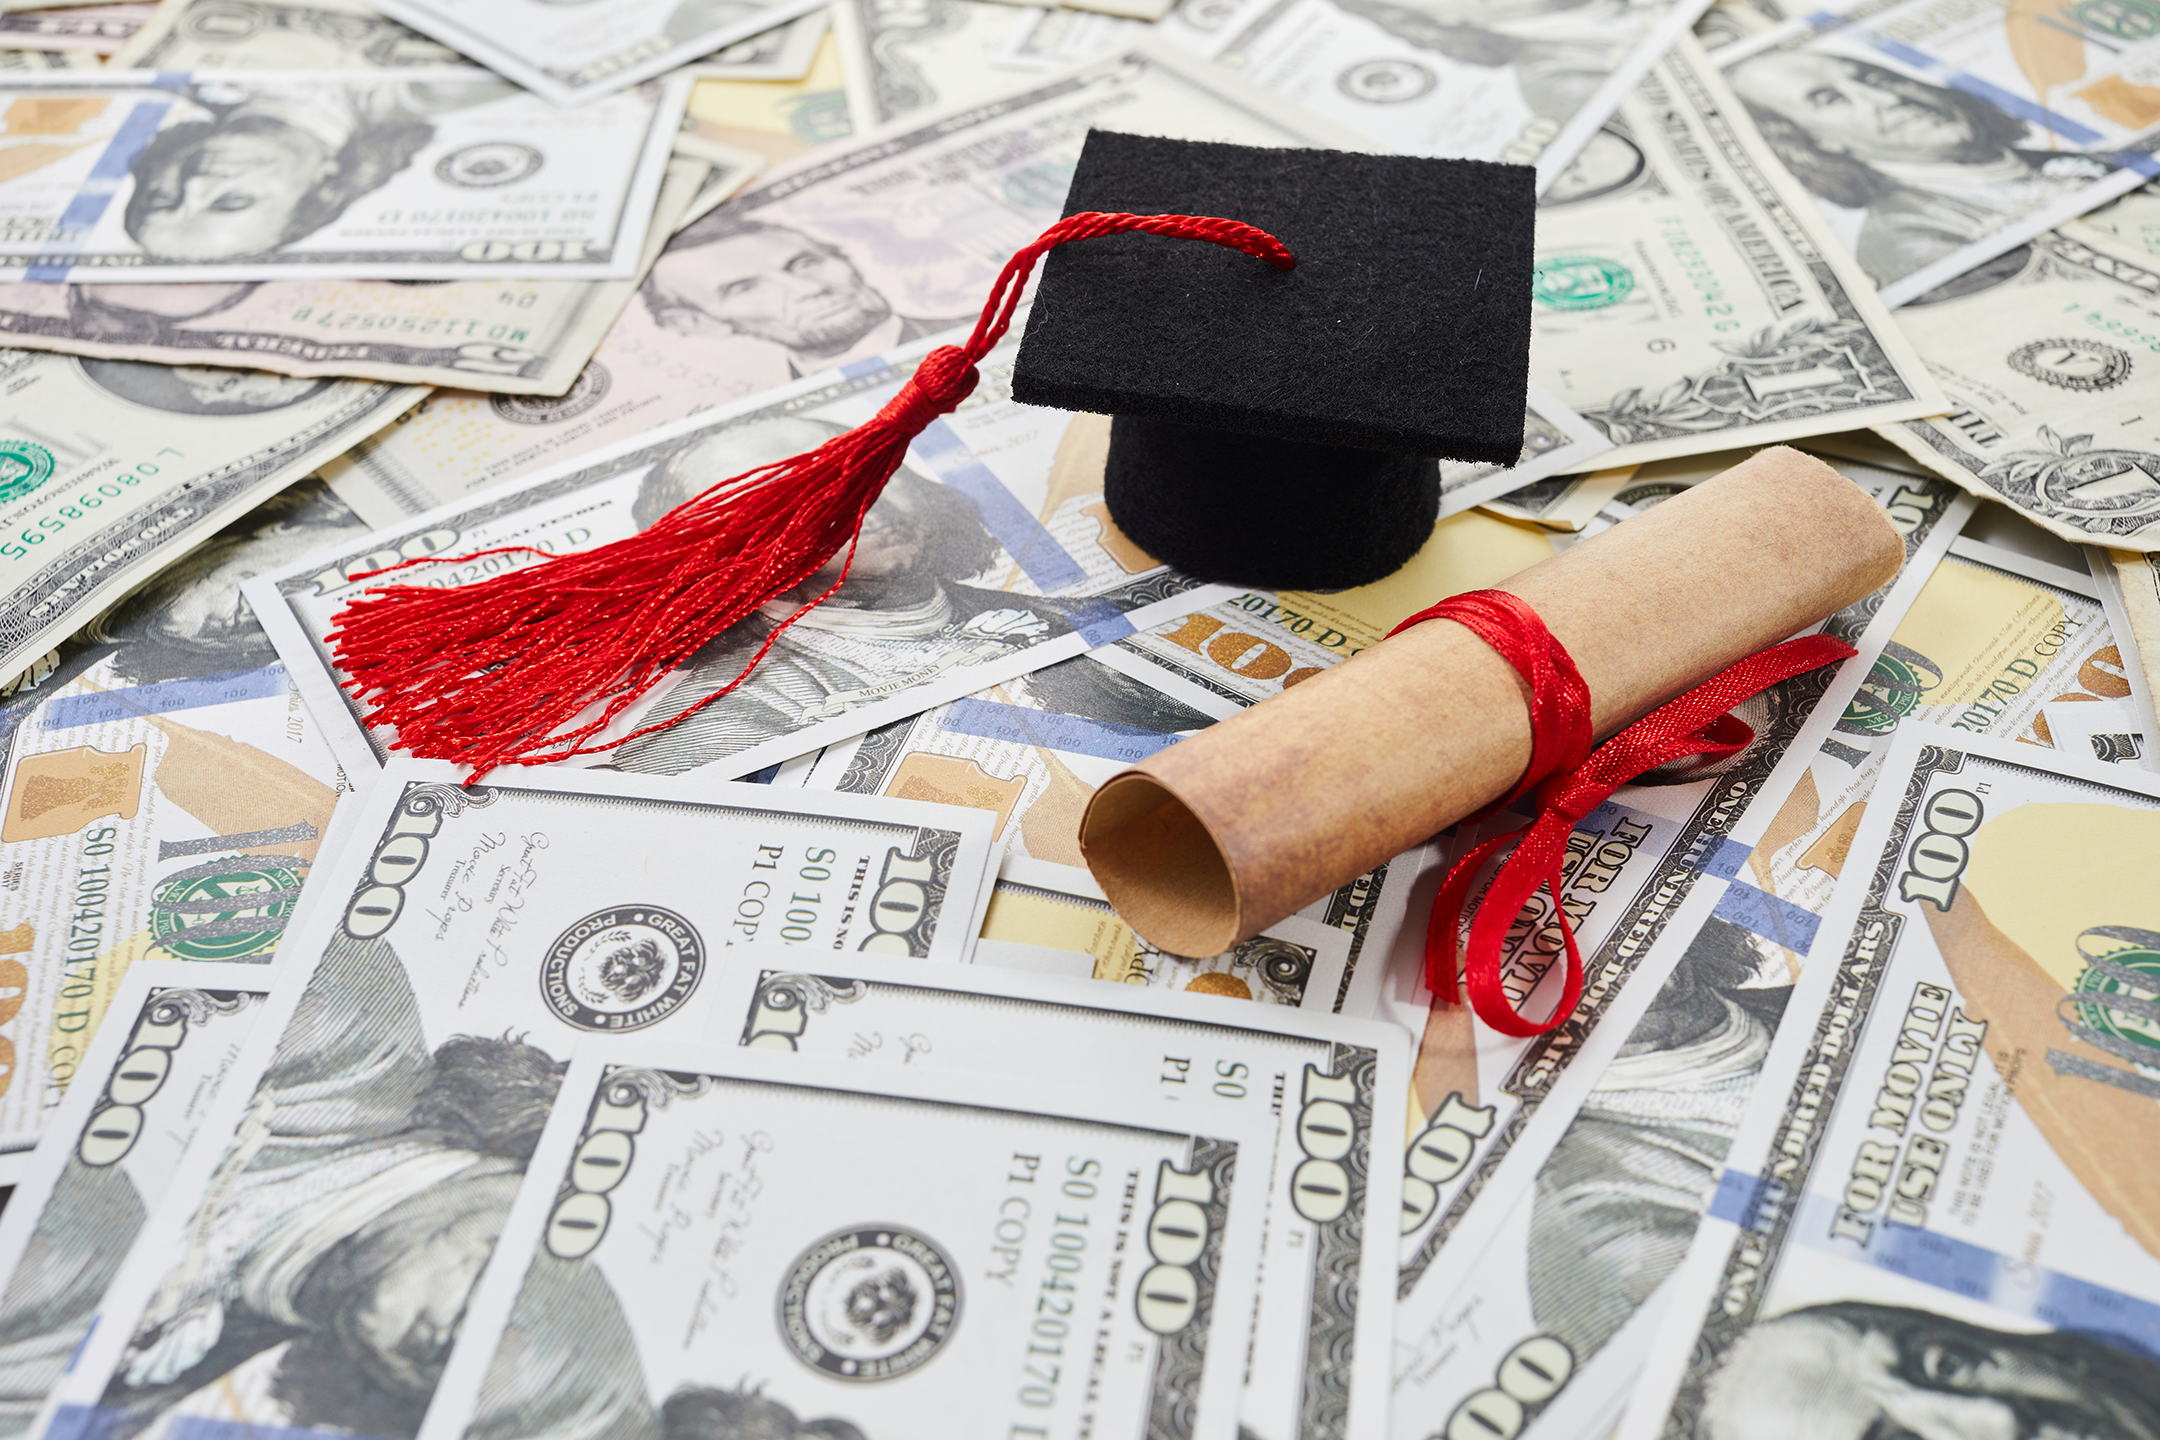 Debt forgiveness hopes gone. Now what? Practical steps to pay down student loans